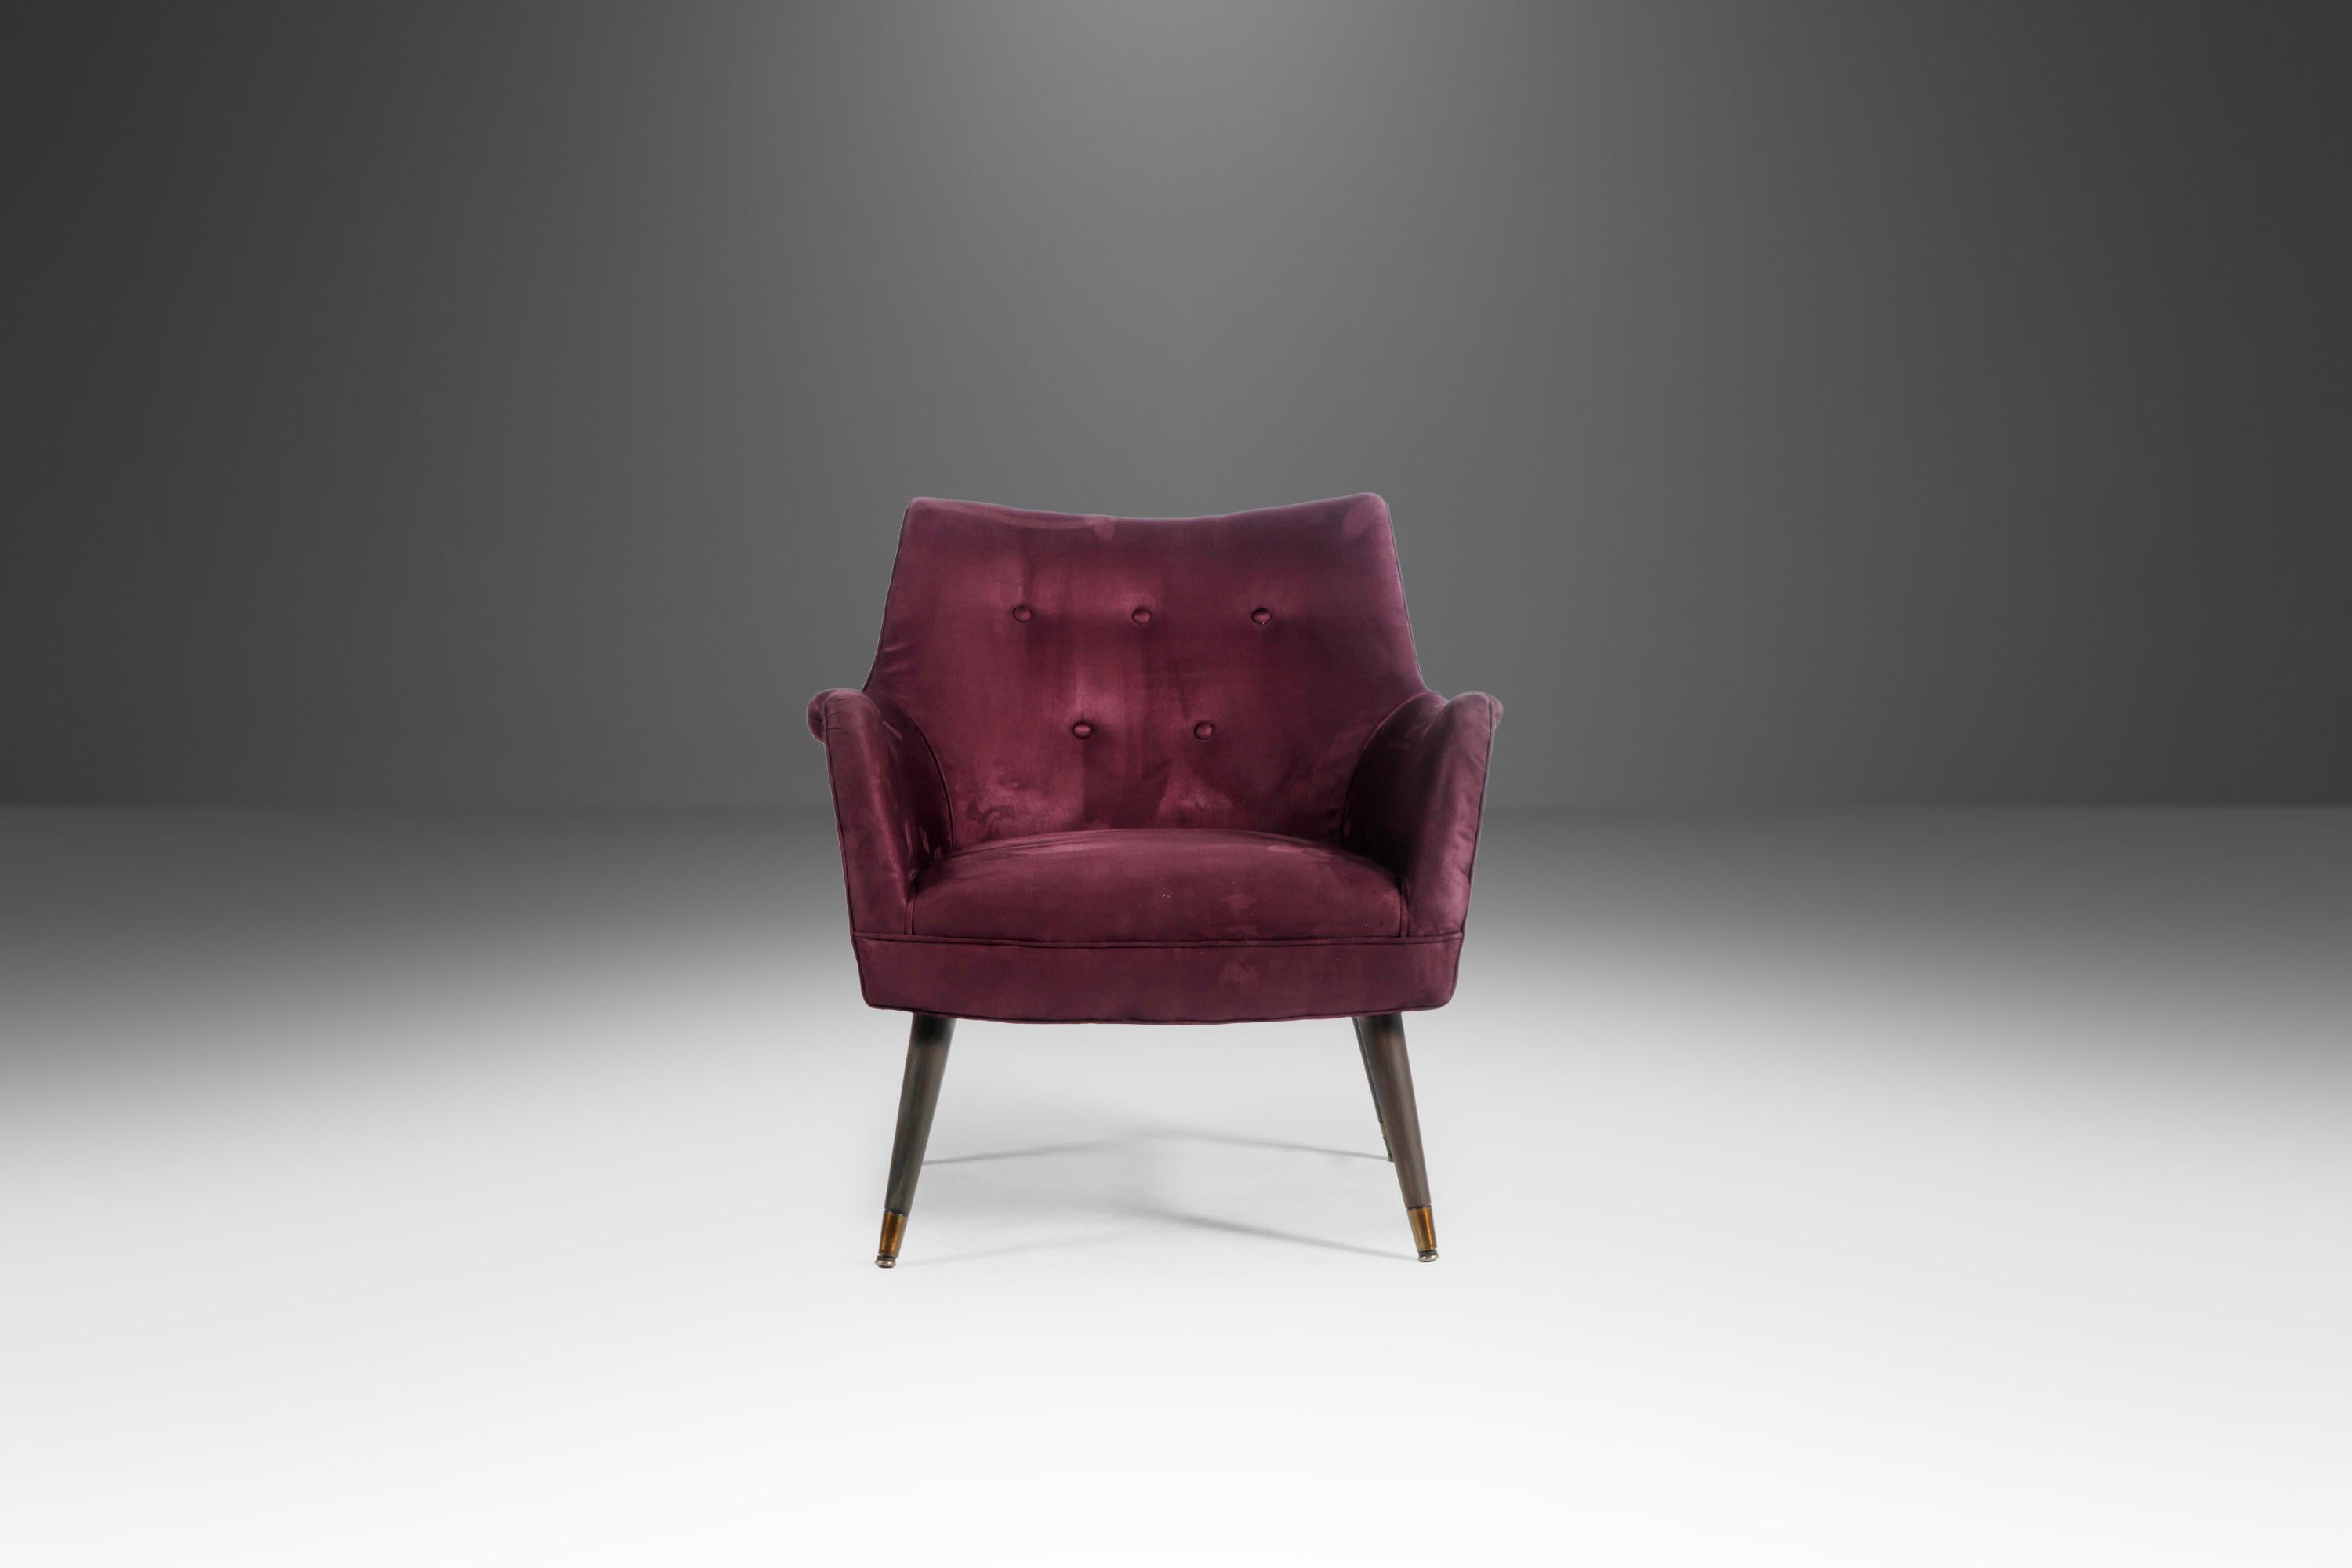 The perfect amalgamation of luxurious materials and captivating shapes these exquisite arm chairs are the perfect seating for almost any space both home or office. The fabulous micro suede, in a deep purple, is as comfortable to the touch as it is